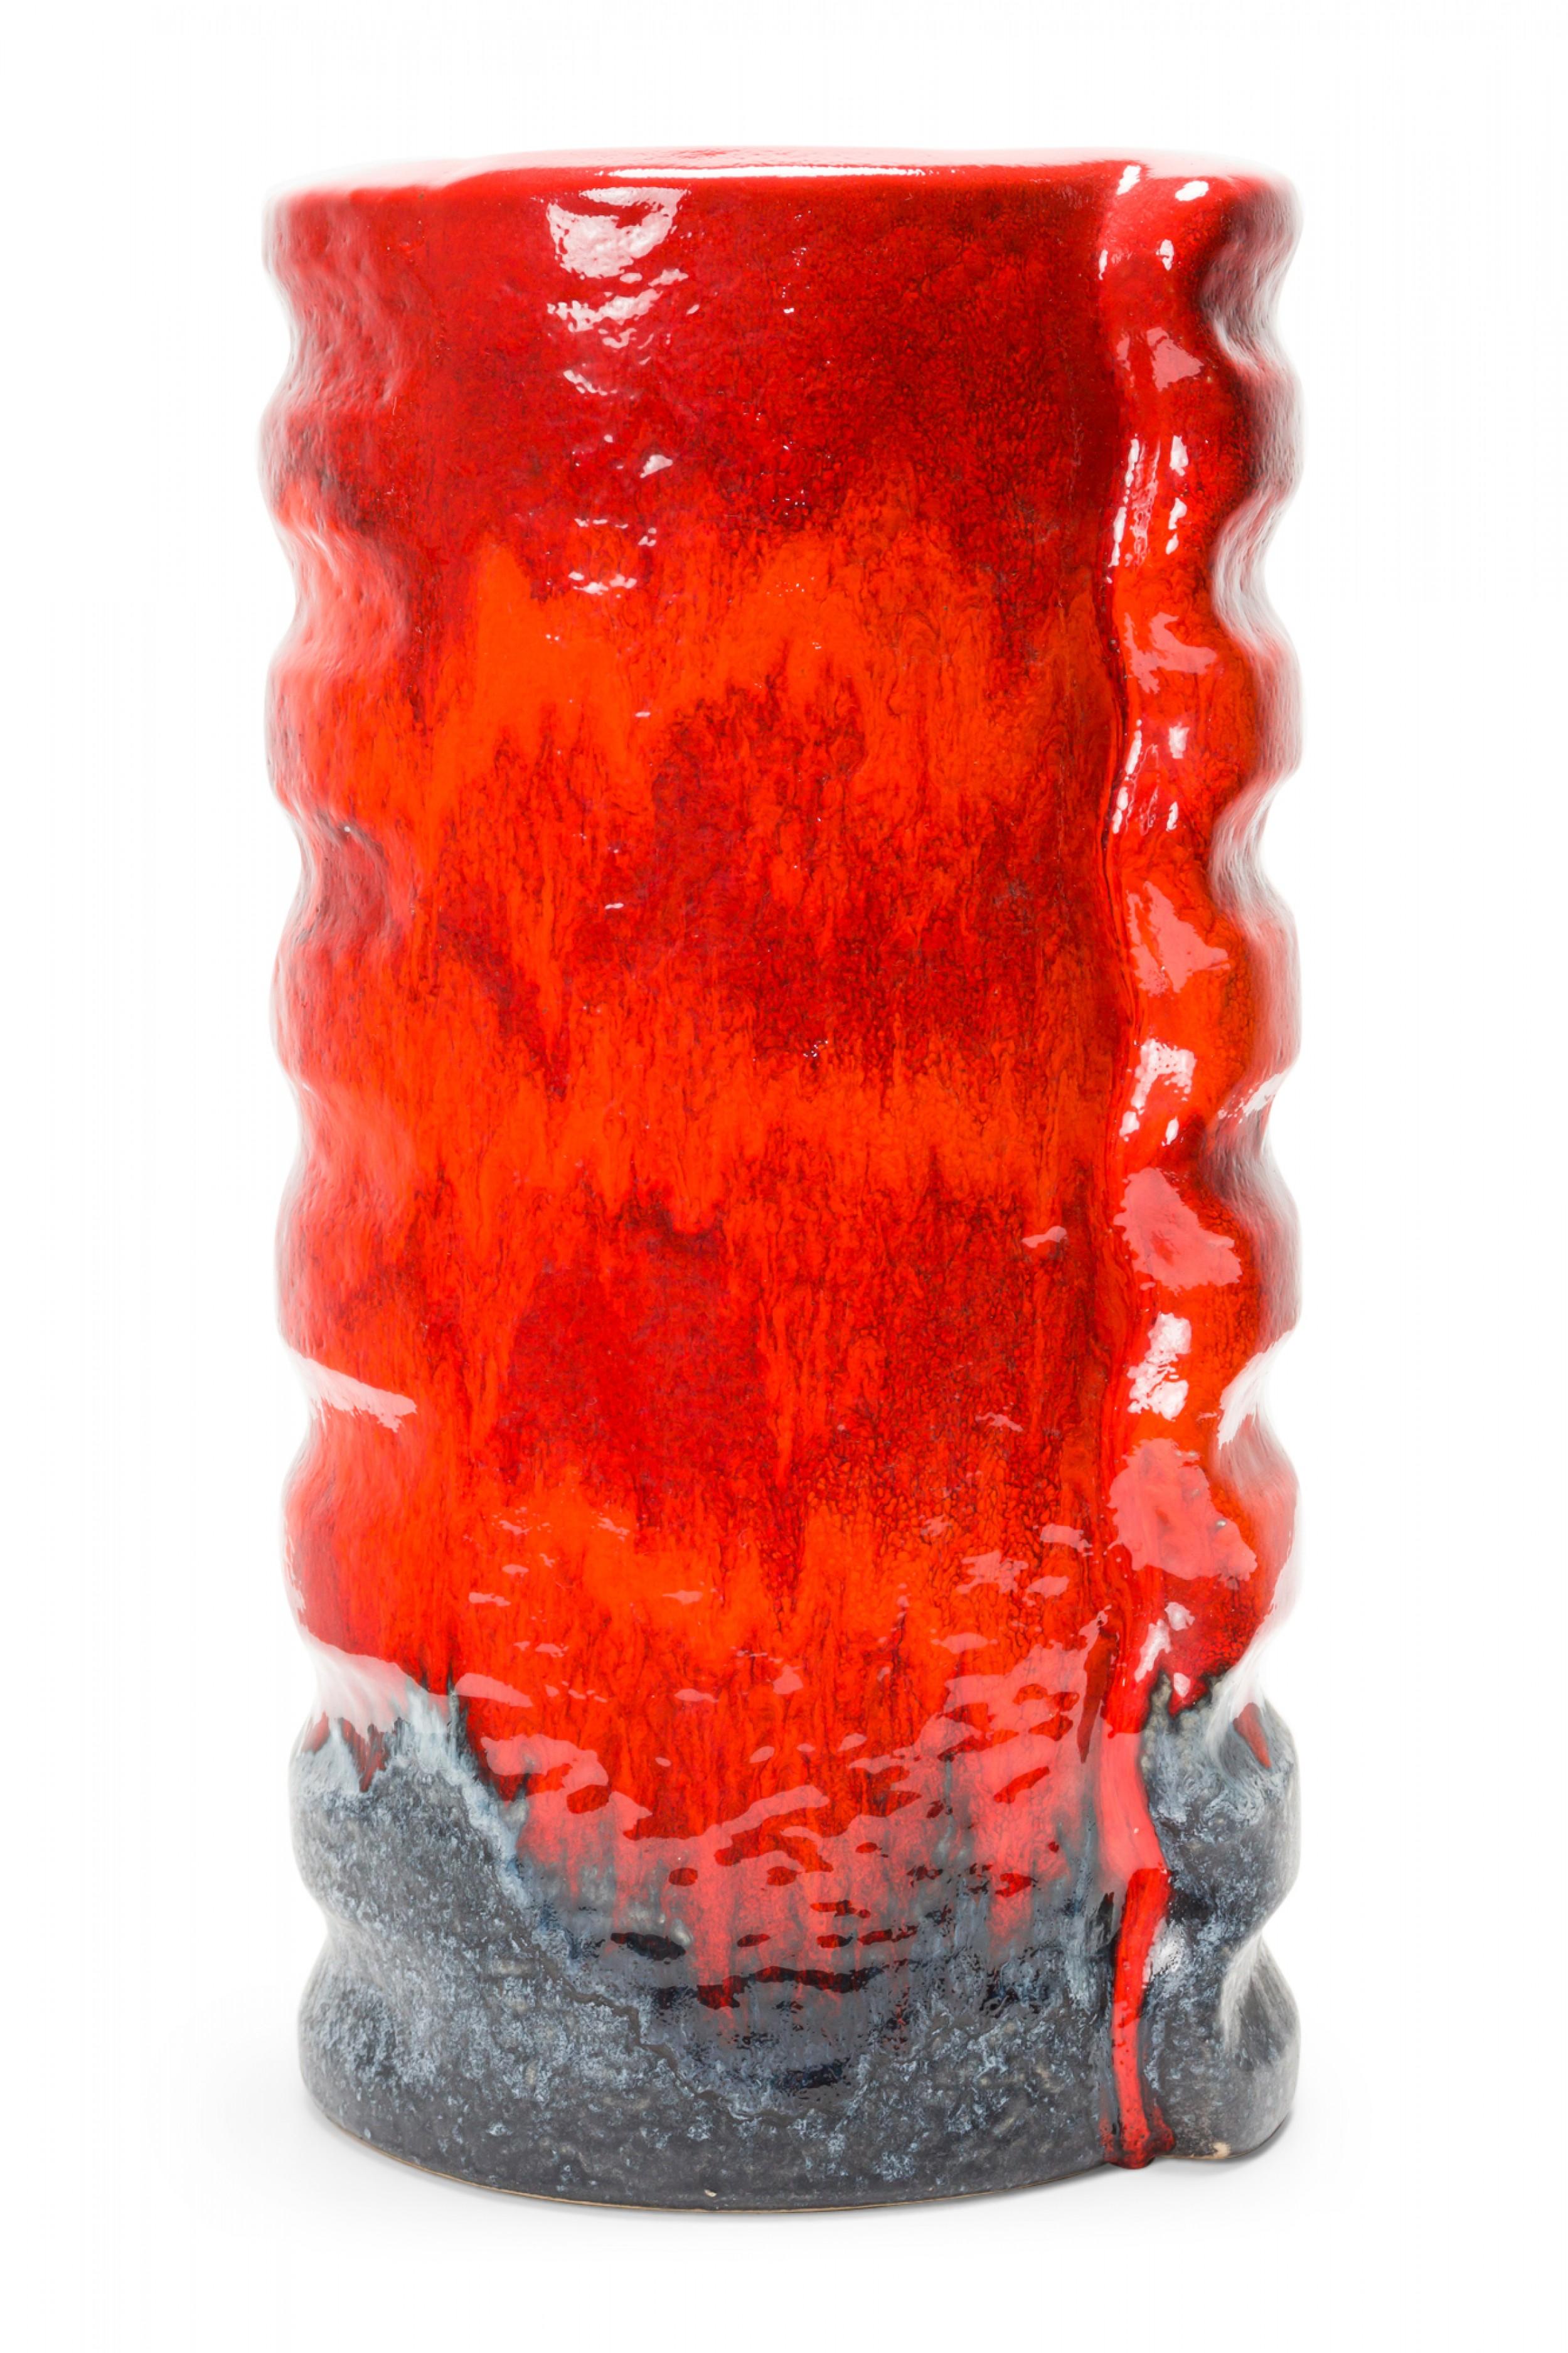 West German mid-century abstract ribbed form ceramic vase with an alternating red and orange fat lava glaze with a mottled gray glazed vase. (mark on bottom for Dümler & Breiden, RELIEF 24/39 GERMANY).